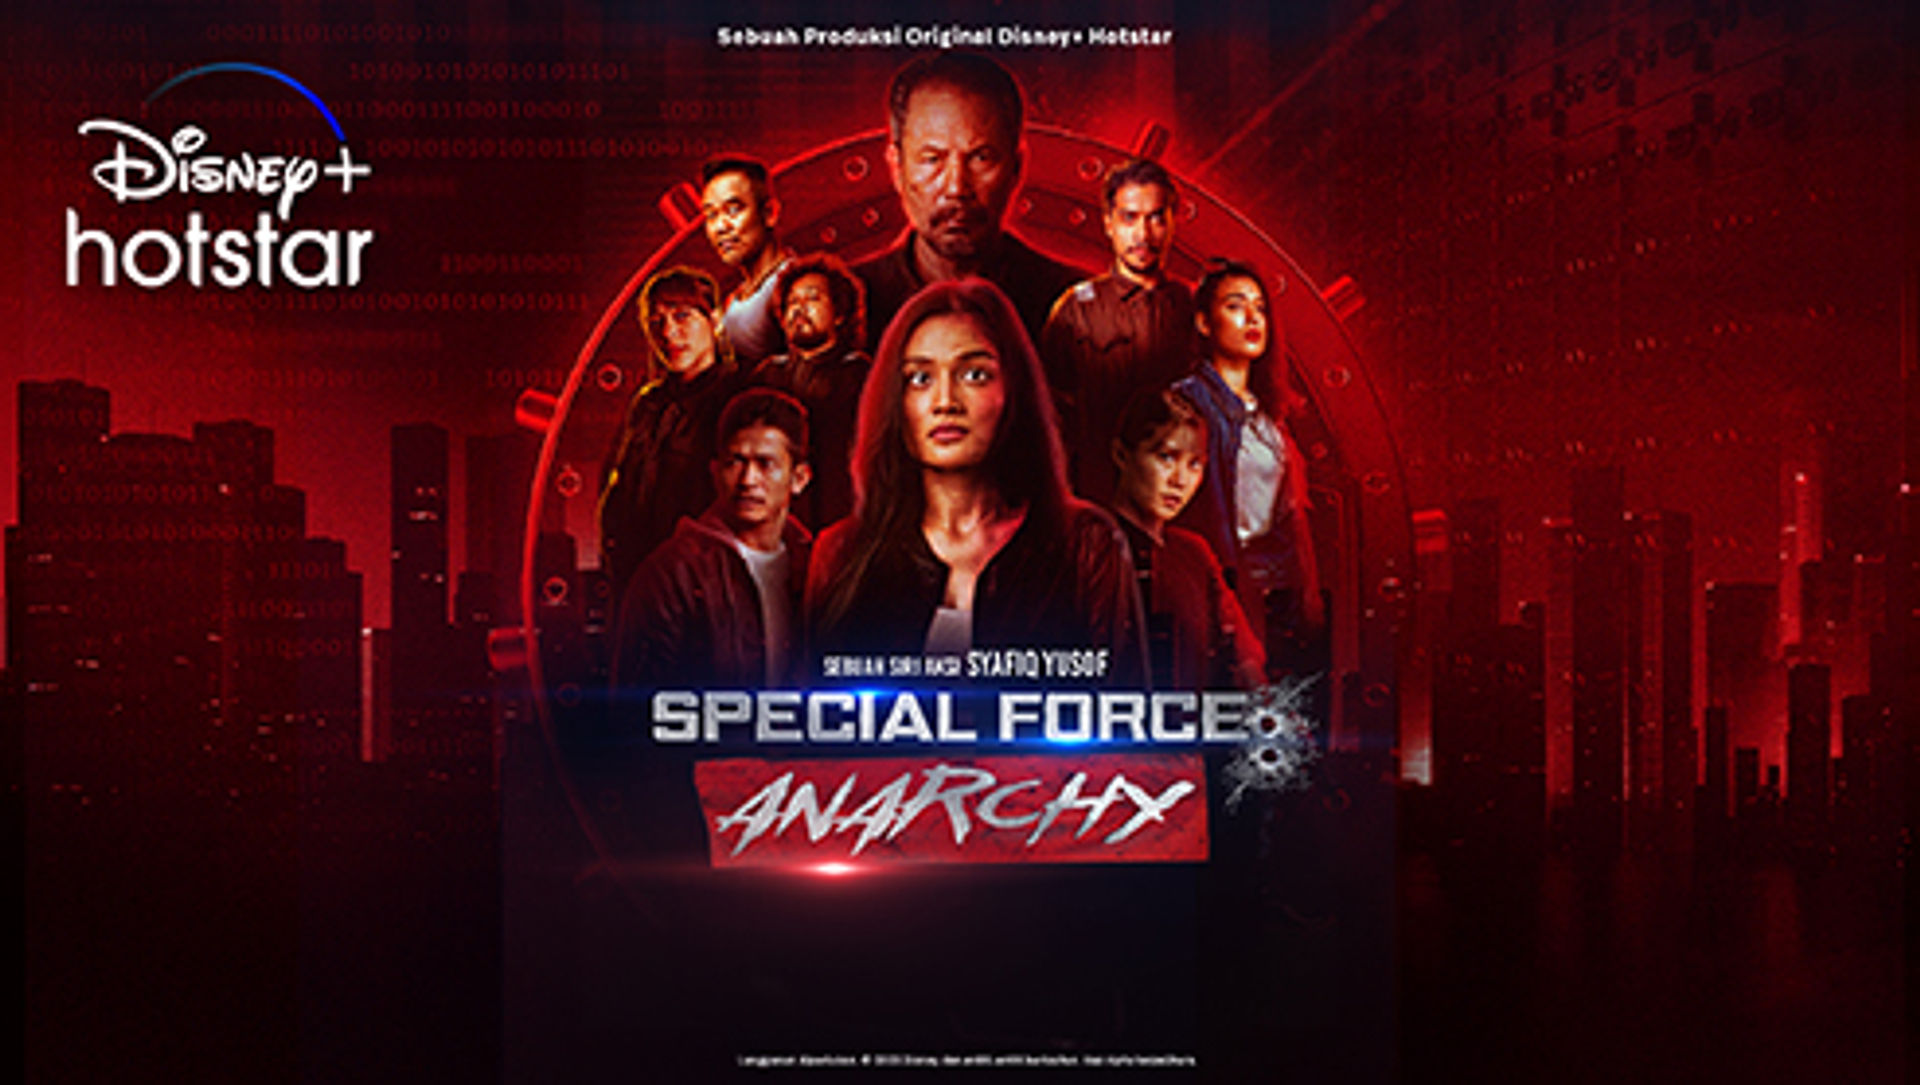 special-force-anarchy